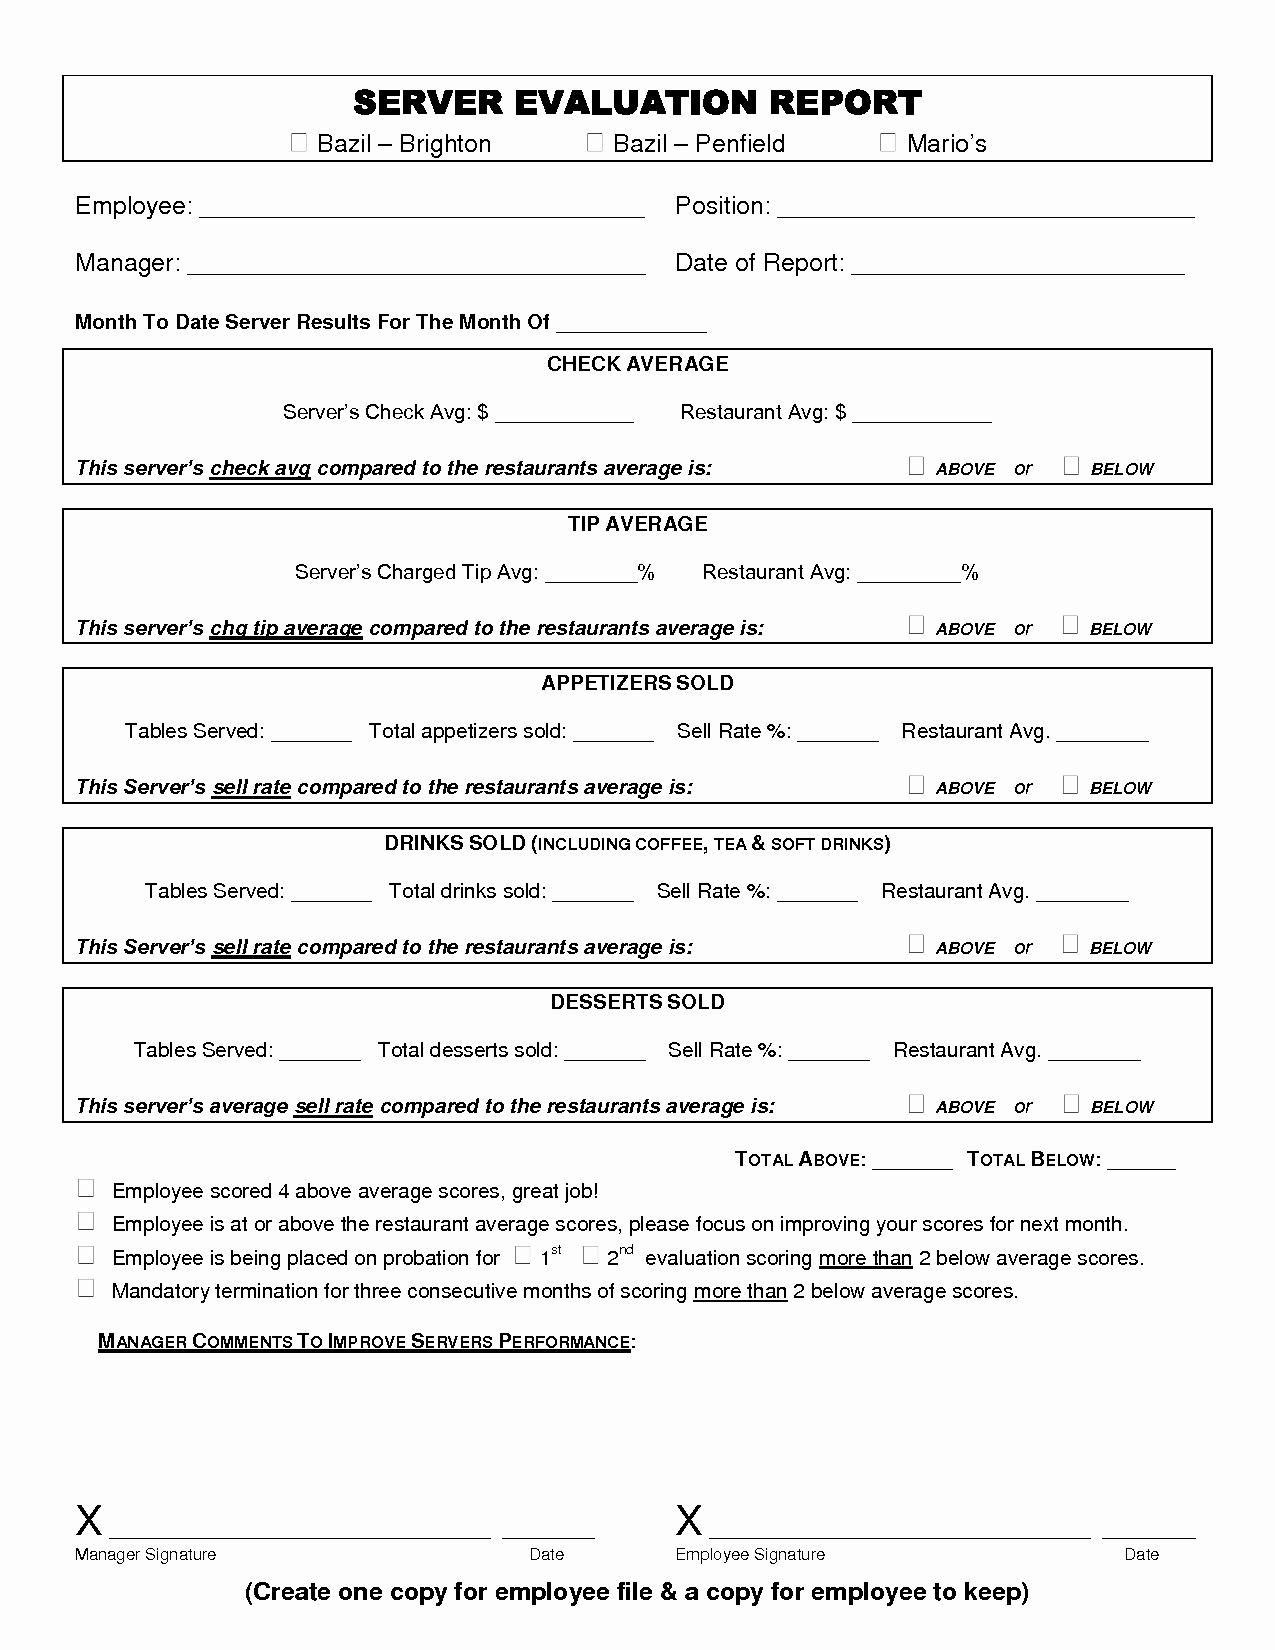 Restaurant Employee Evaluation forms Lovely Server Evaluation form Server Evaluation form